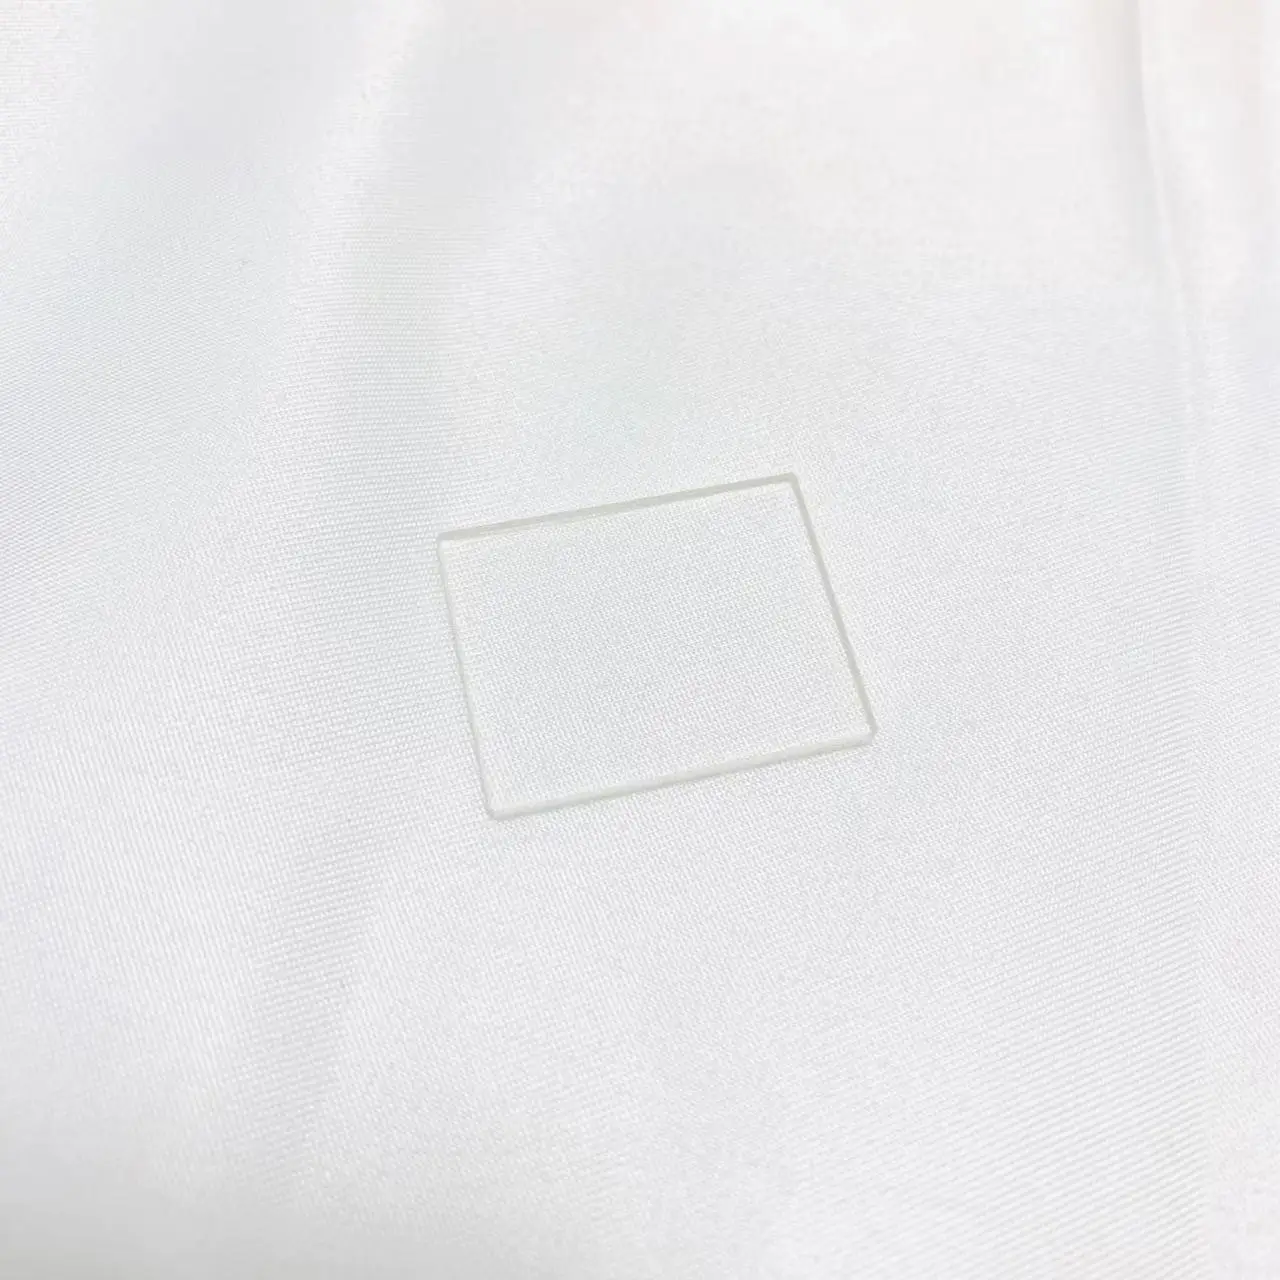 Each Type One Piece Size 28x22x1.6mm 720nm IR Filter And Clear Glass 1pcs 41.7x29.9x1.6mm Transparent Filter